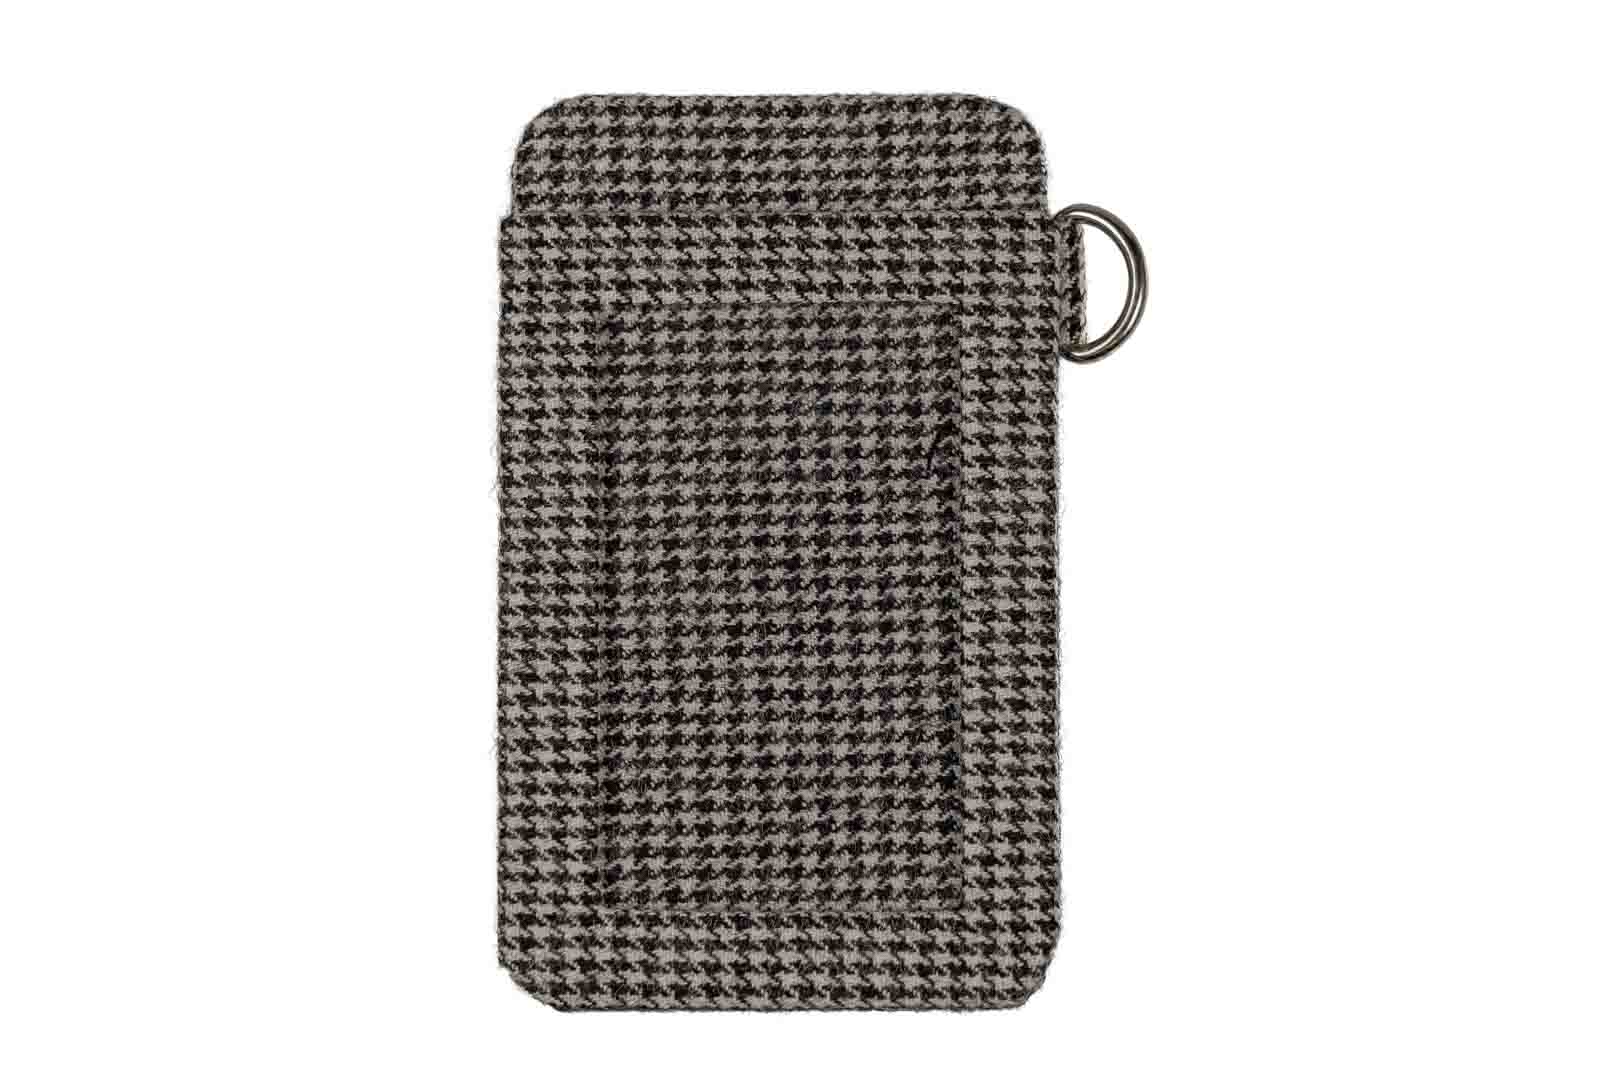 Sustainable Card Wallet Woven Black And White